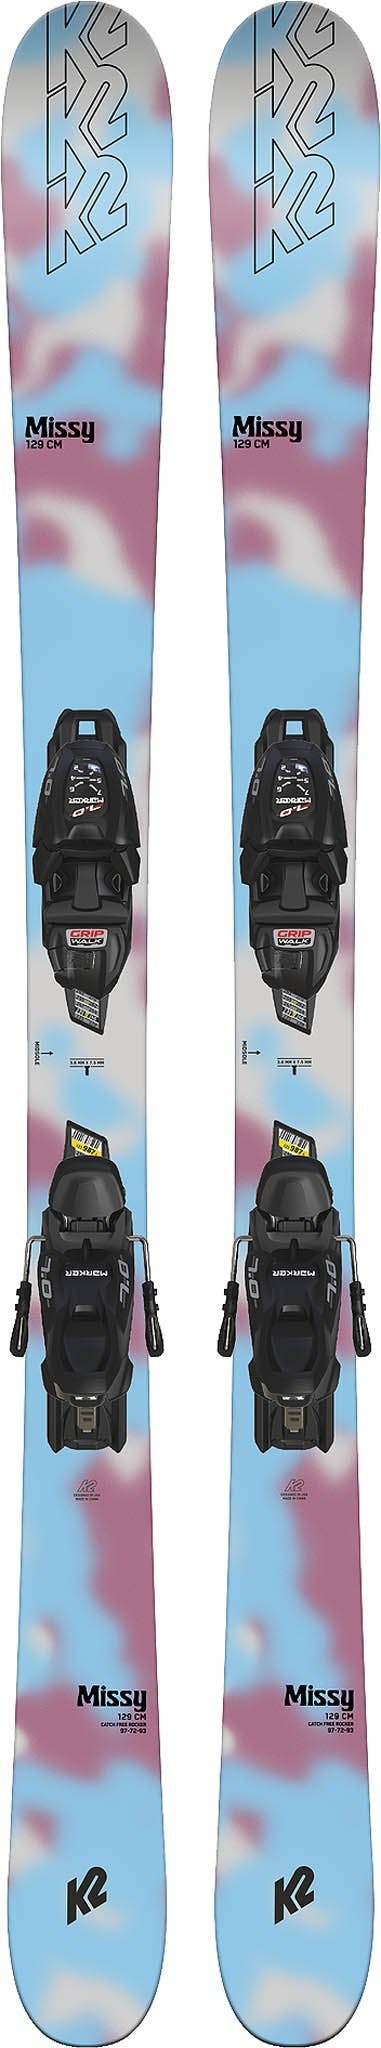 Product image for Missy 7.0 Fdt Ski - Youth